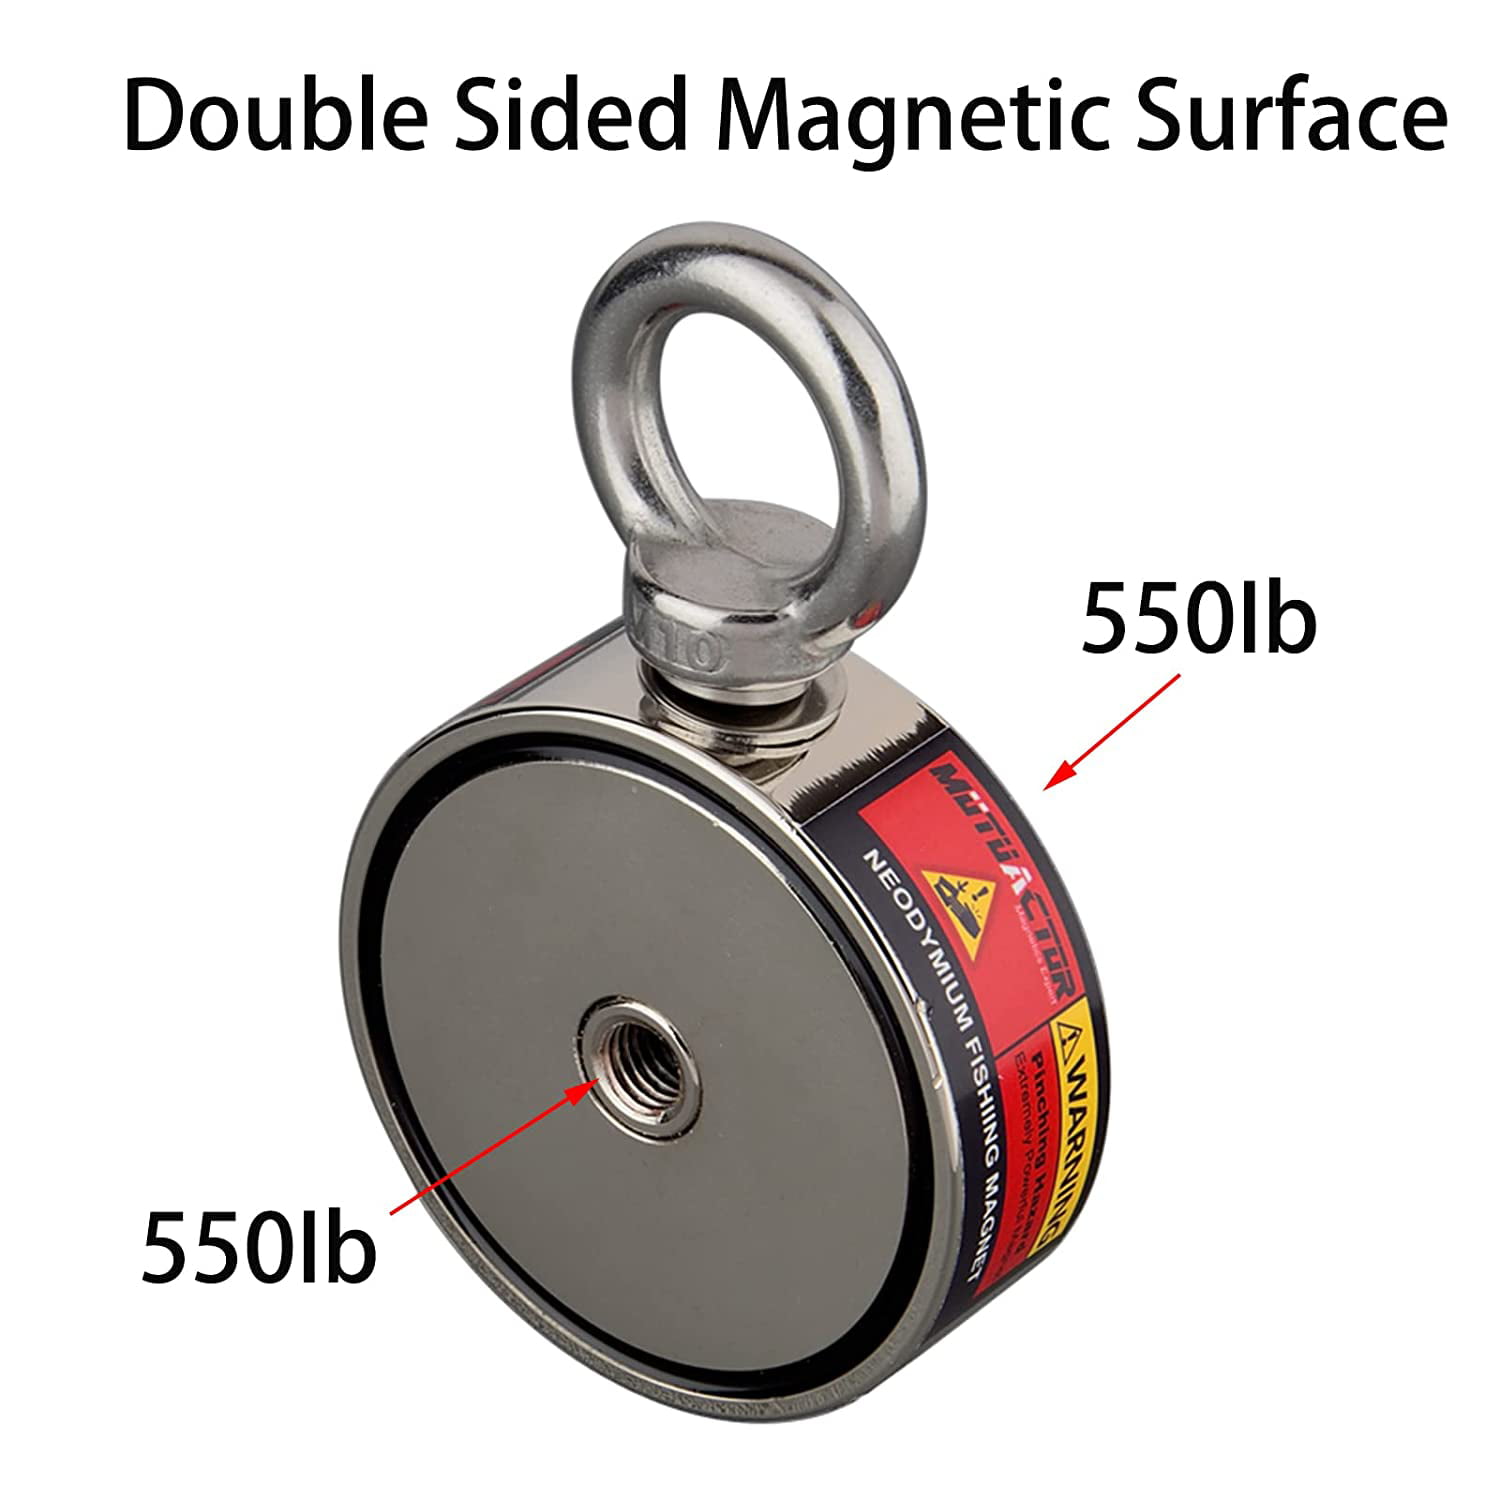 MUTUACTOR Rotatable Double Sided Magnet Fishing Kit Combined 880lb Magnetic  Pull Force, Heavy Duty Neodymium Magnet N52, Powerful Strong Magnetic of